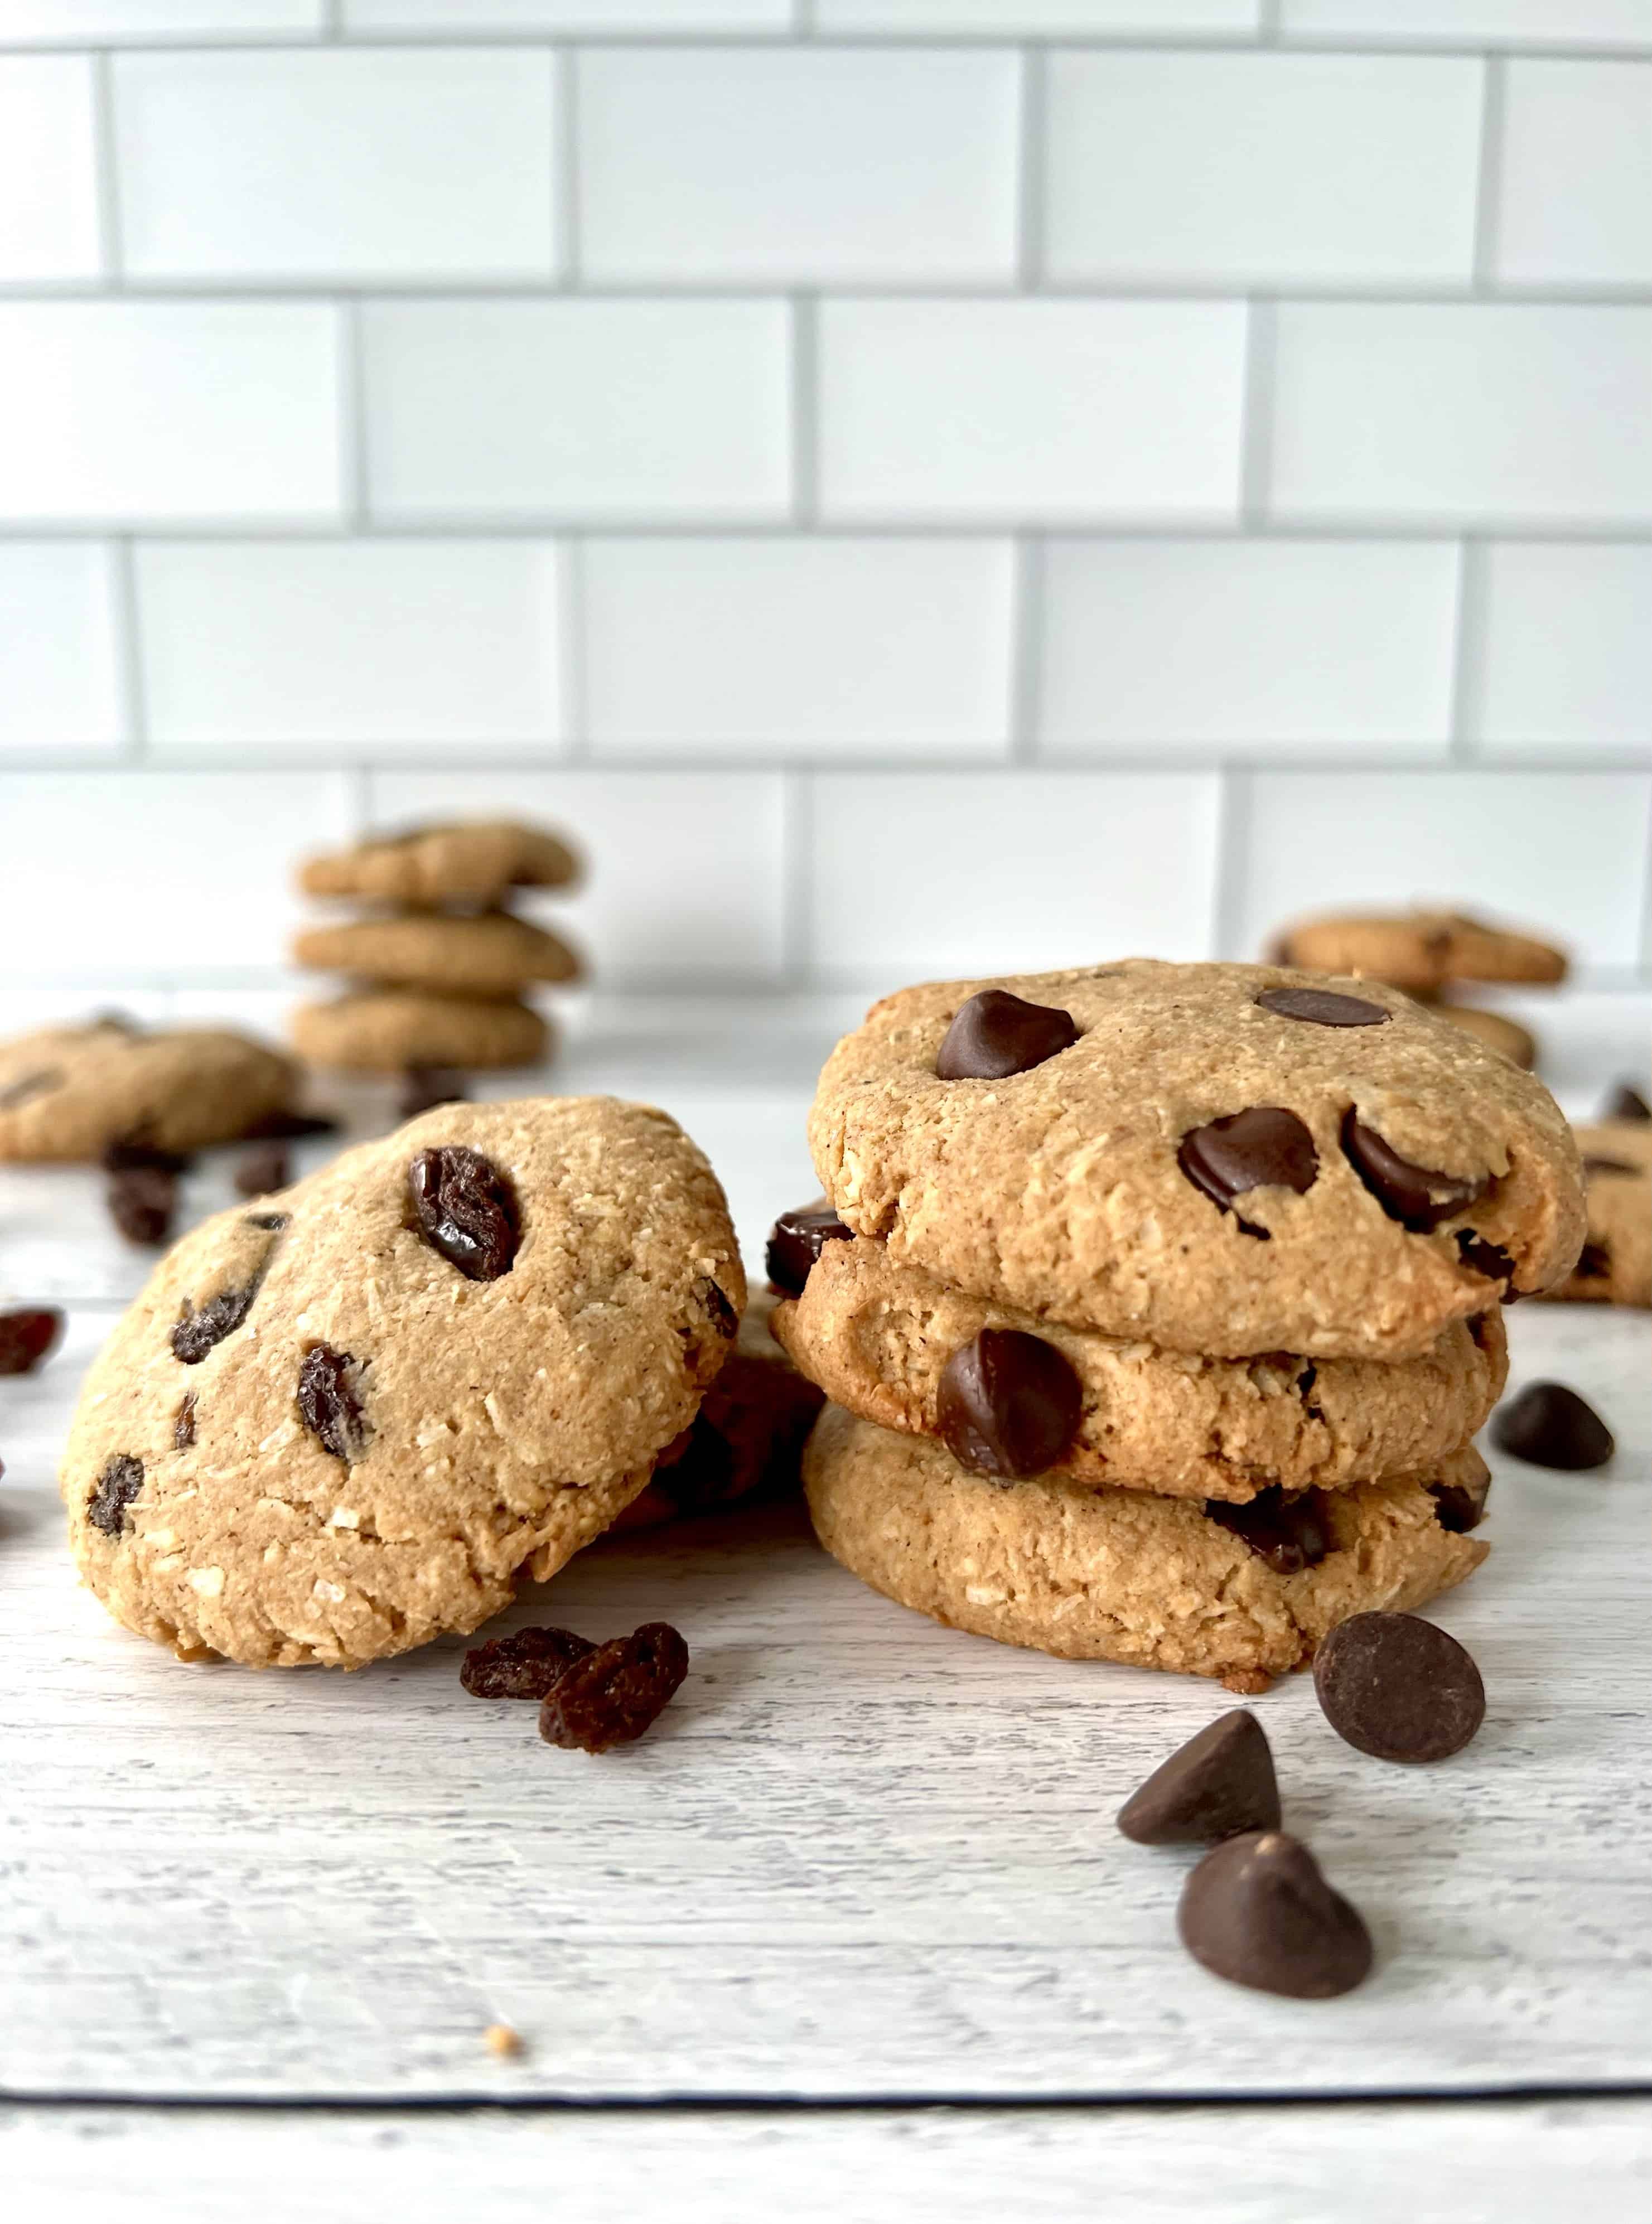 Gluten-free oatmeal cookies with raisins or chocolate chips stacked on a white wooden table.